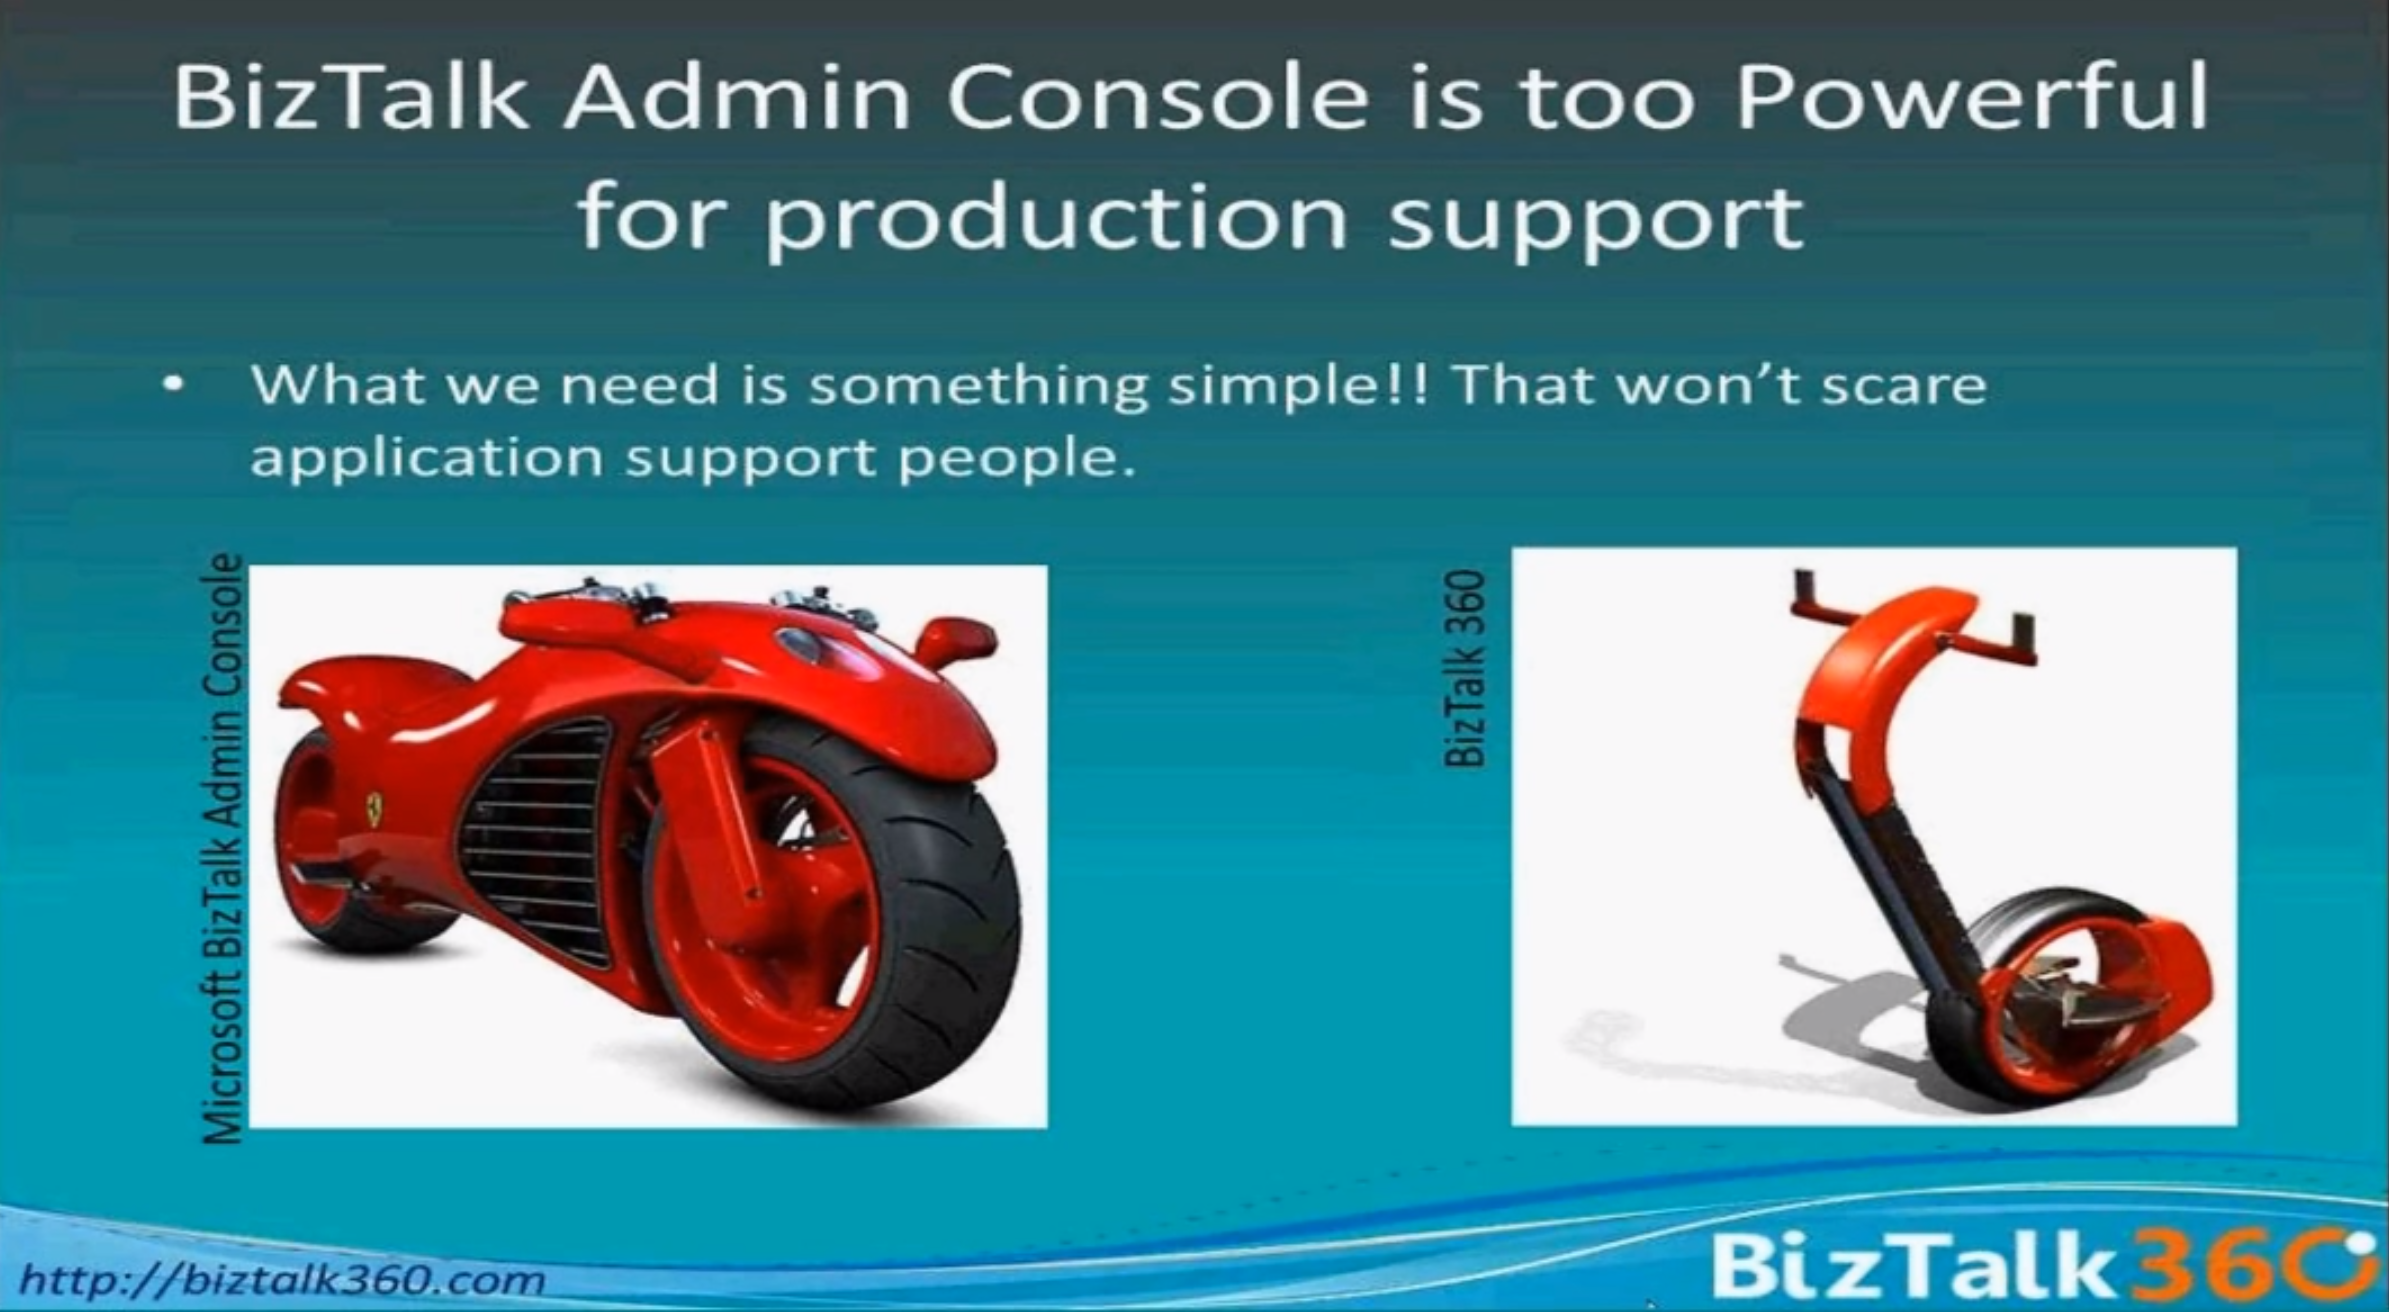 BizTalk admin console is too powerful for production support